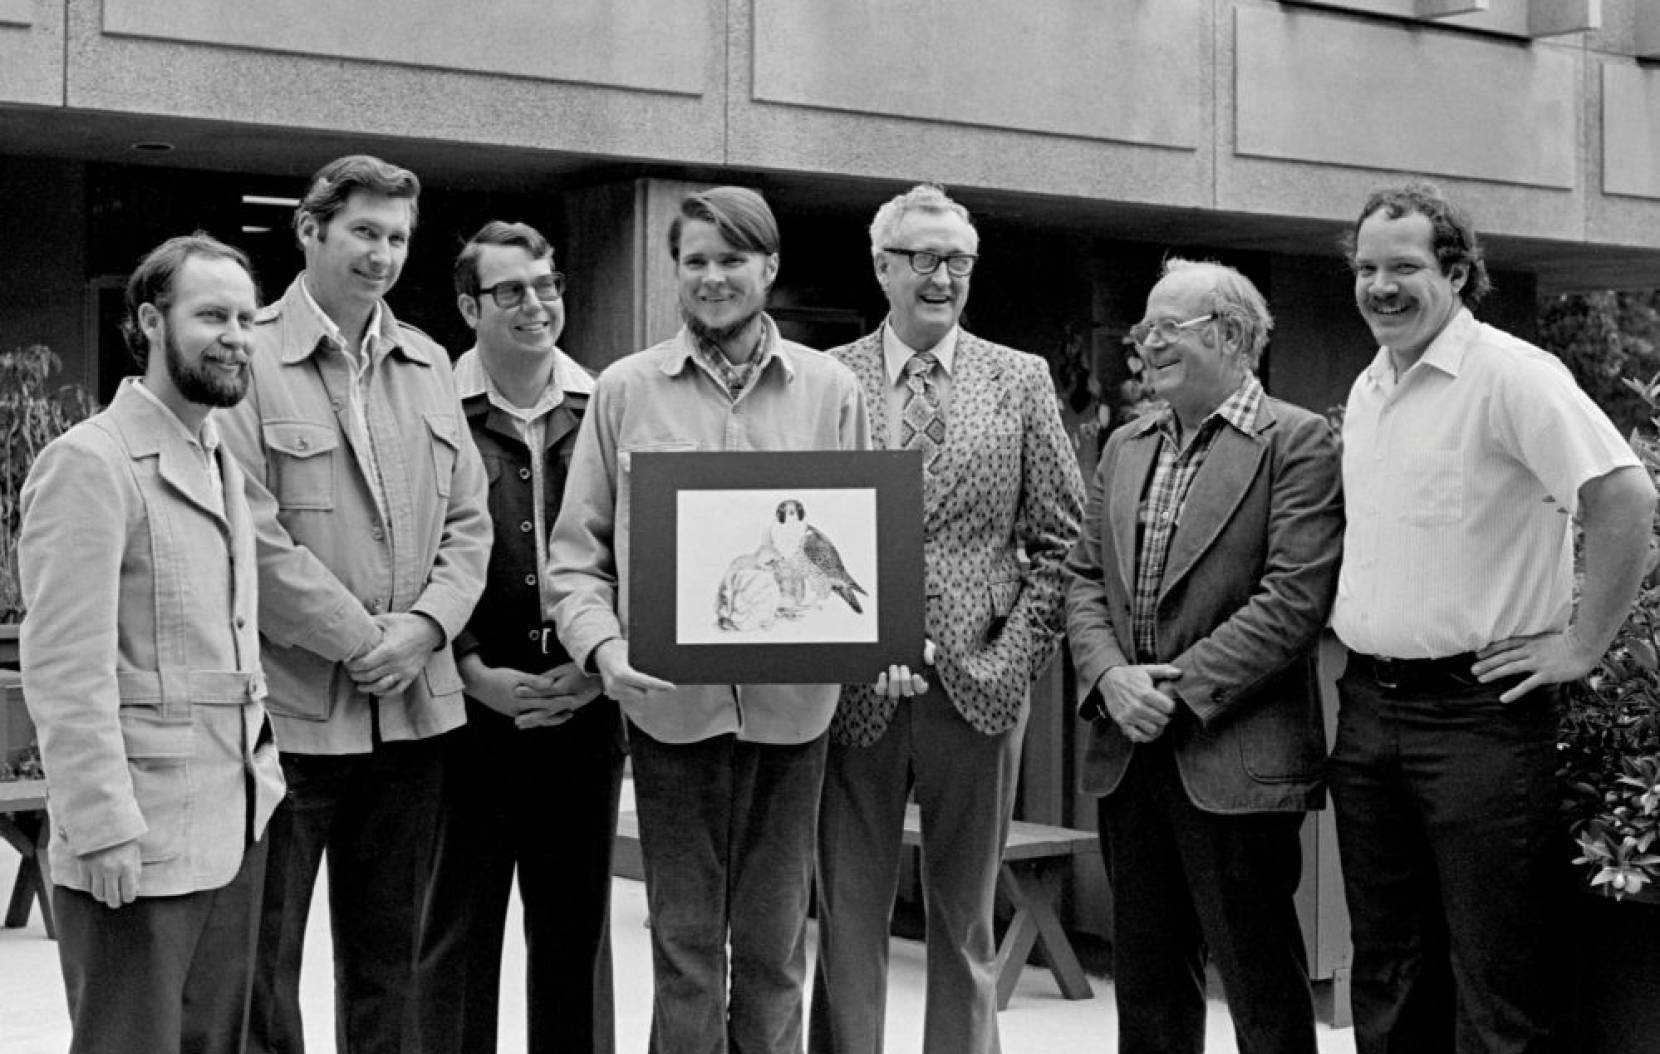 A black and white photograph of 7 men in the 1970s on the UC Santa Cruz campus; in the middle, Brian Walton holds a portrait of a peregrine falcon